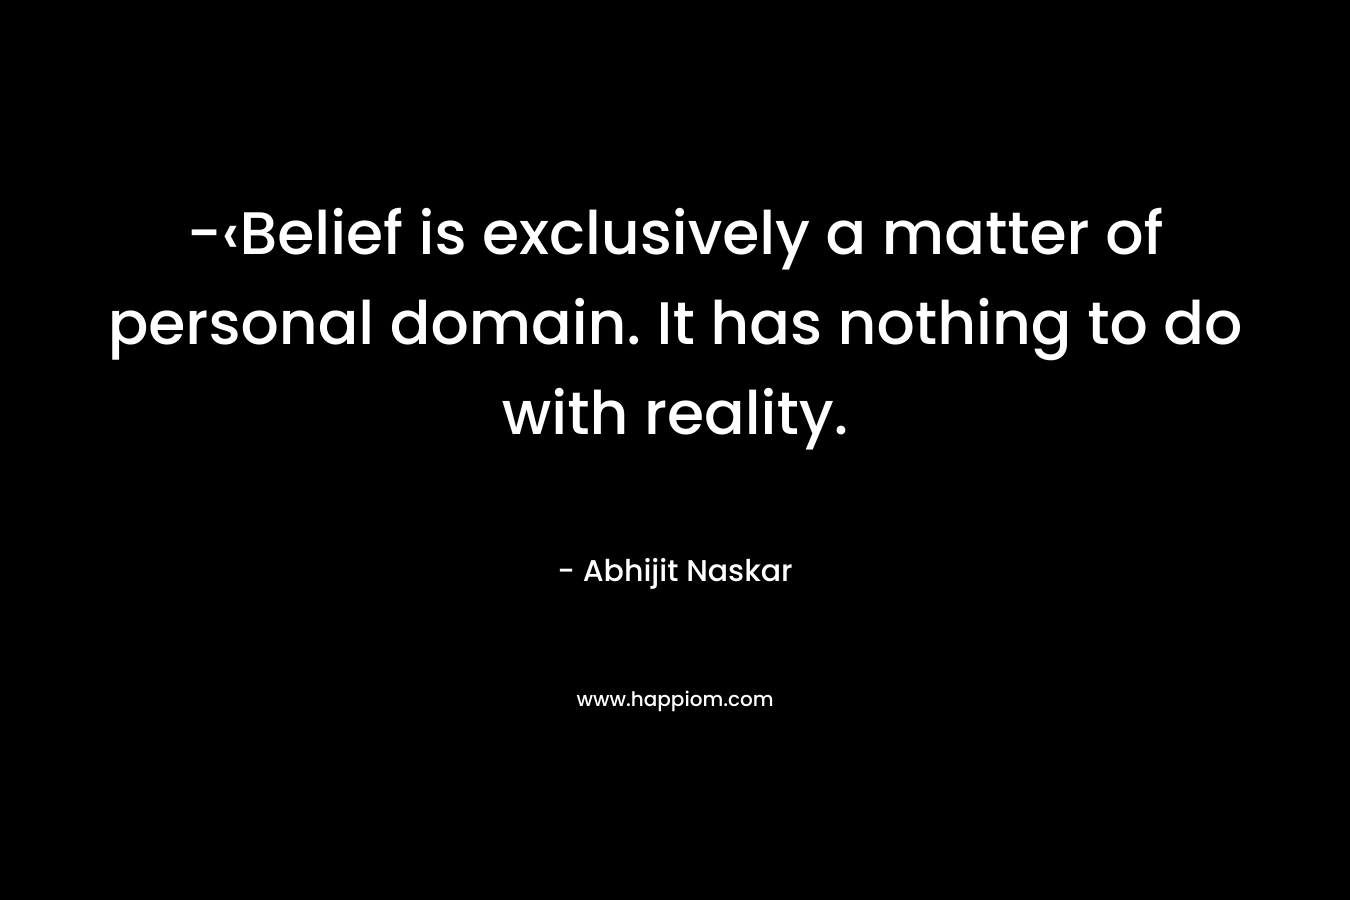 -‹Belief is exclusively a matter of personal domain. It has nothing to do with reality.